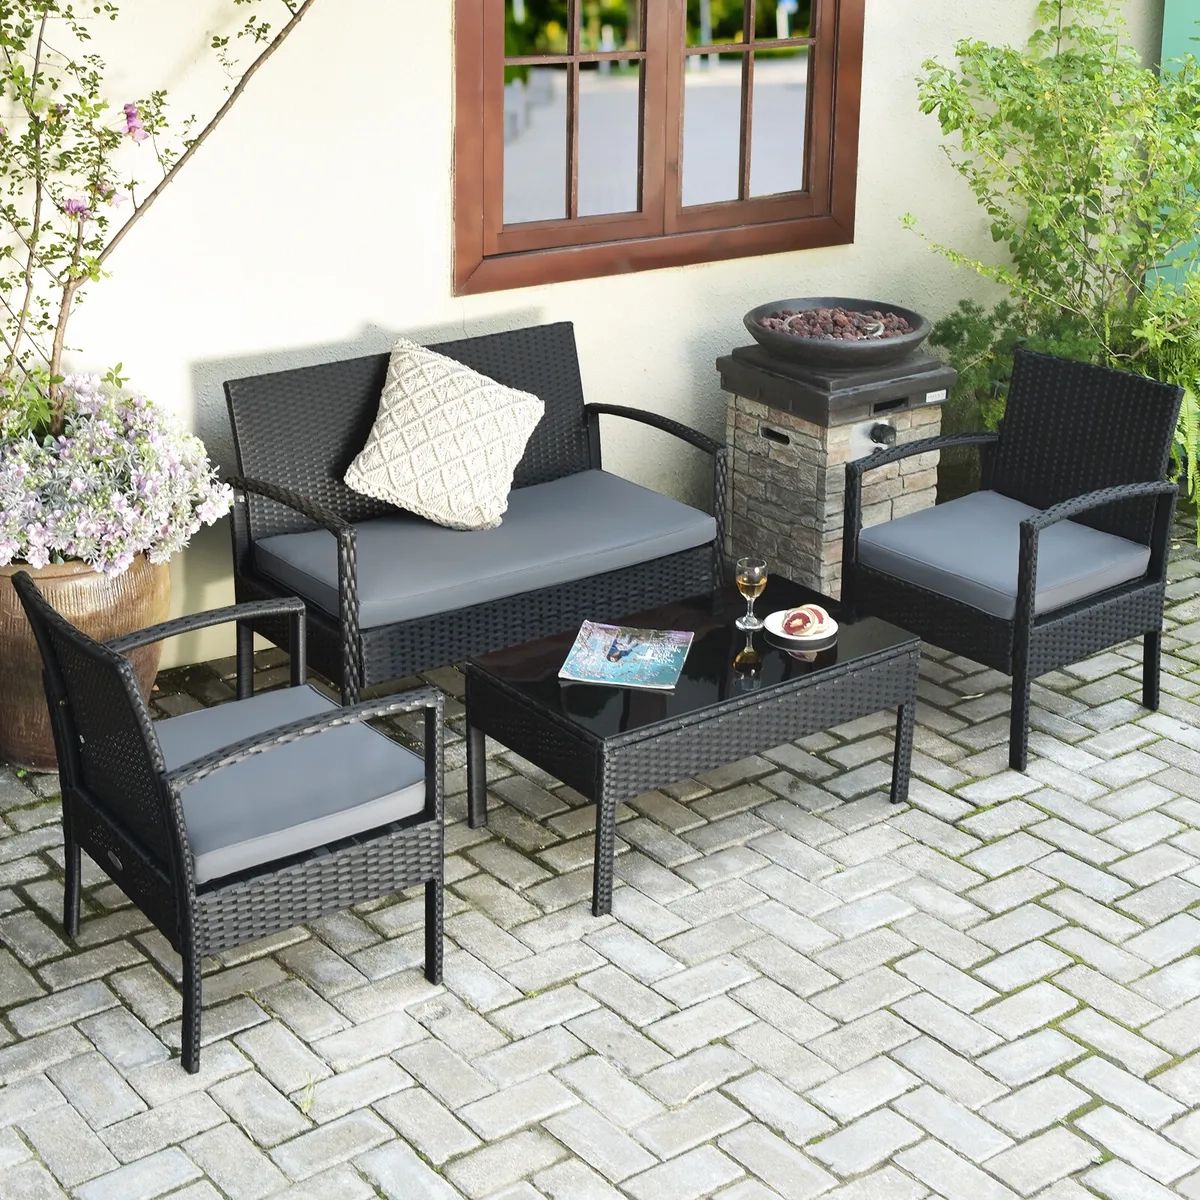 4pcs Outdoor Patio Rattan Furniture Set Cushioned Sofa Coffee Table Chair  Deck | Ebay In 4pcs Rattan Patio Coffee Tables (View 3 of 15)